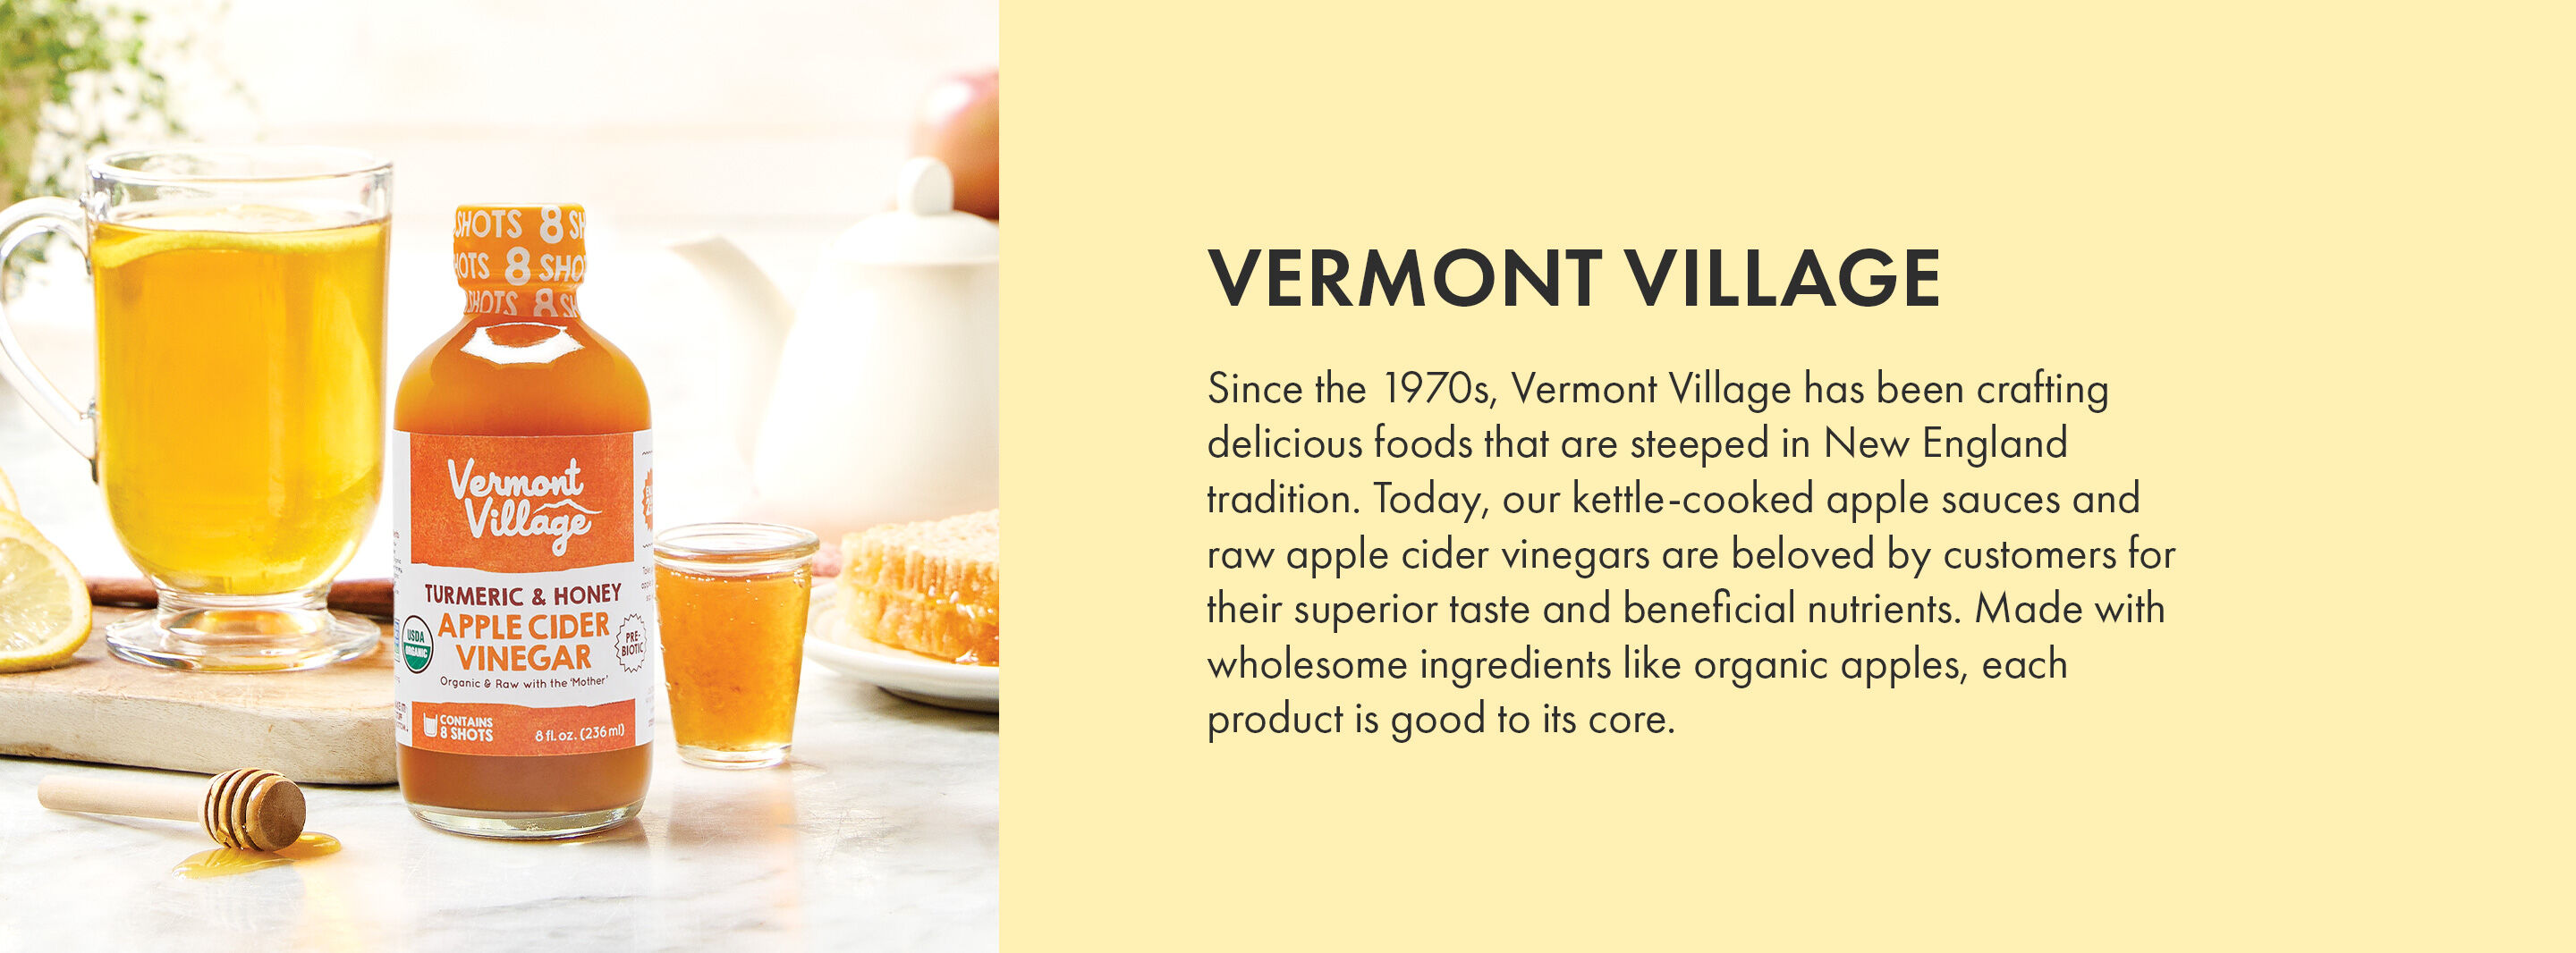 Vermont Village | Since the 1970s, Vermont Village has been crafting delicious foods that are steeped in New England tradition. Today, our kettle-cooked apple sauces and raw apple cider vinegars are beloved by customers for their superior taste and beneficial nutrients. Made with wholesome ingredients like organic apples, each product is good to its core.